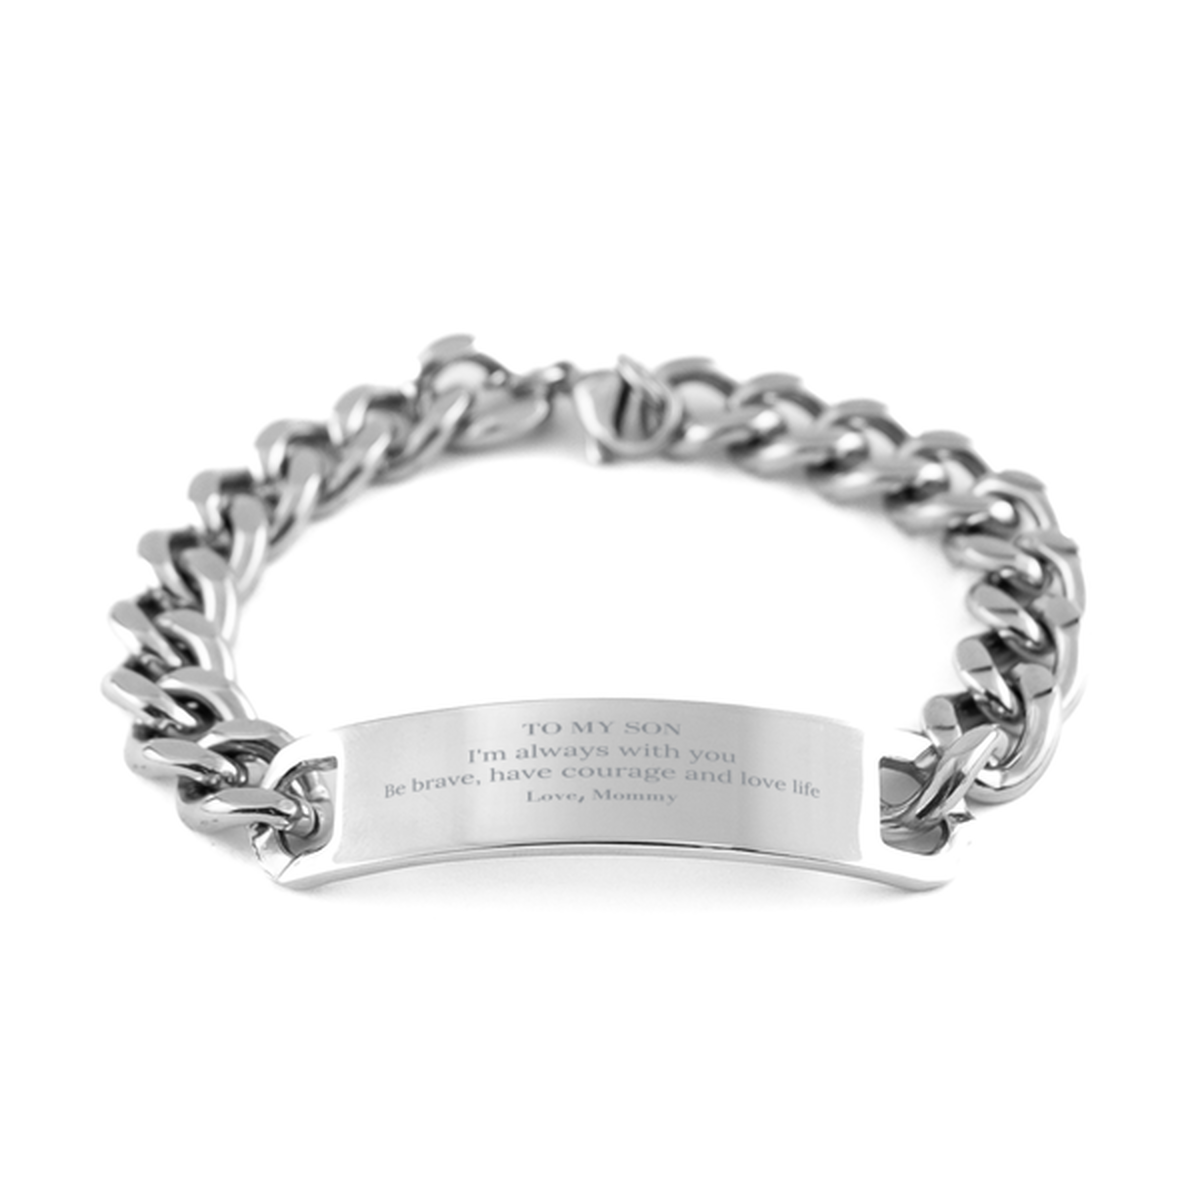 To My Son Gifts from Mommy, Unique Cuban Chain Stainless Steel Bracelet Inspirational Christmas Birthday Graduation Gifts for Son I'm always with you. Be brave, have courage and love life. Love, Mommy